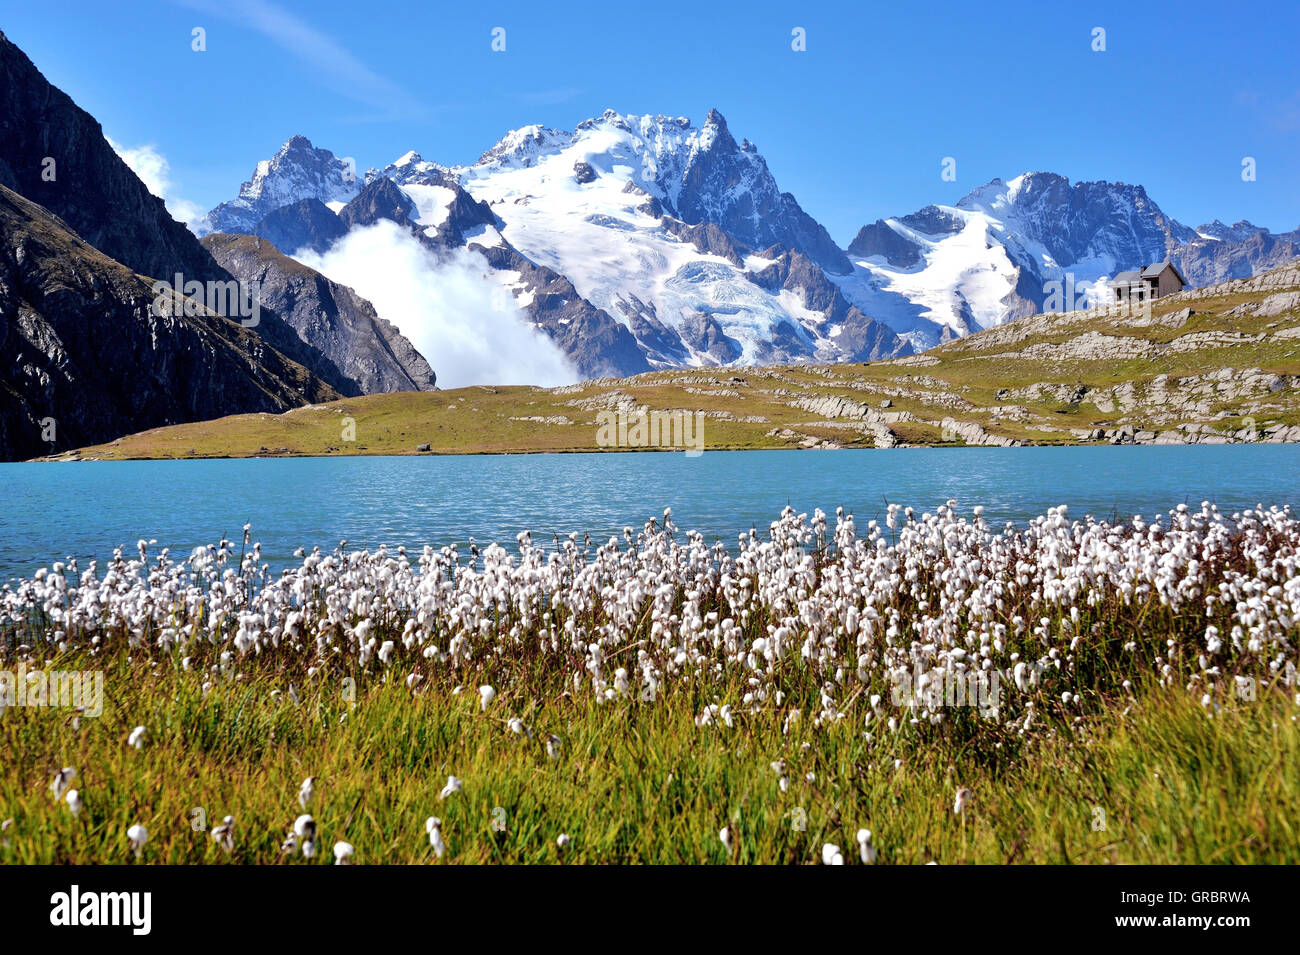 Moutain Lake Lac Goléon With Cotton Grass In The Foreground An The Mountain La Meije, French Alps, France Stock Photo